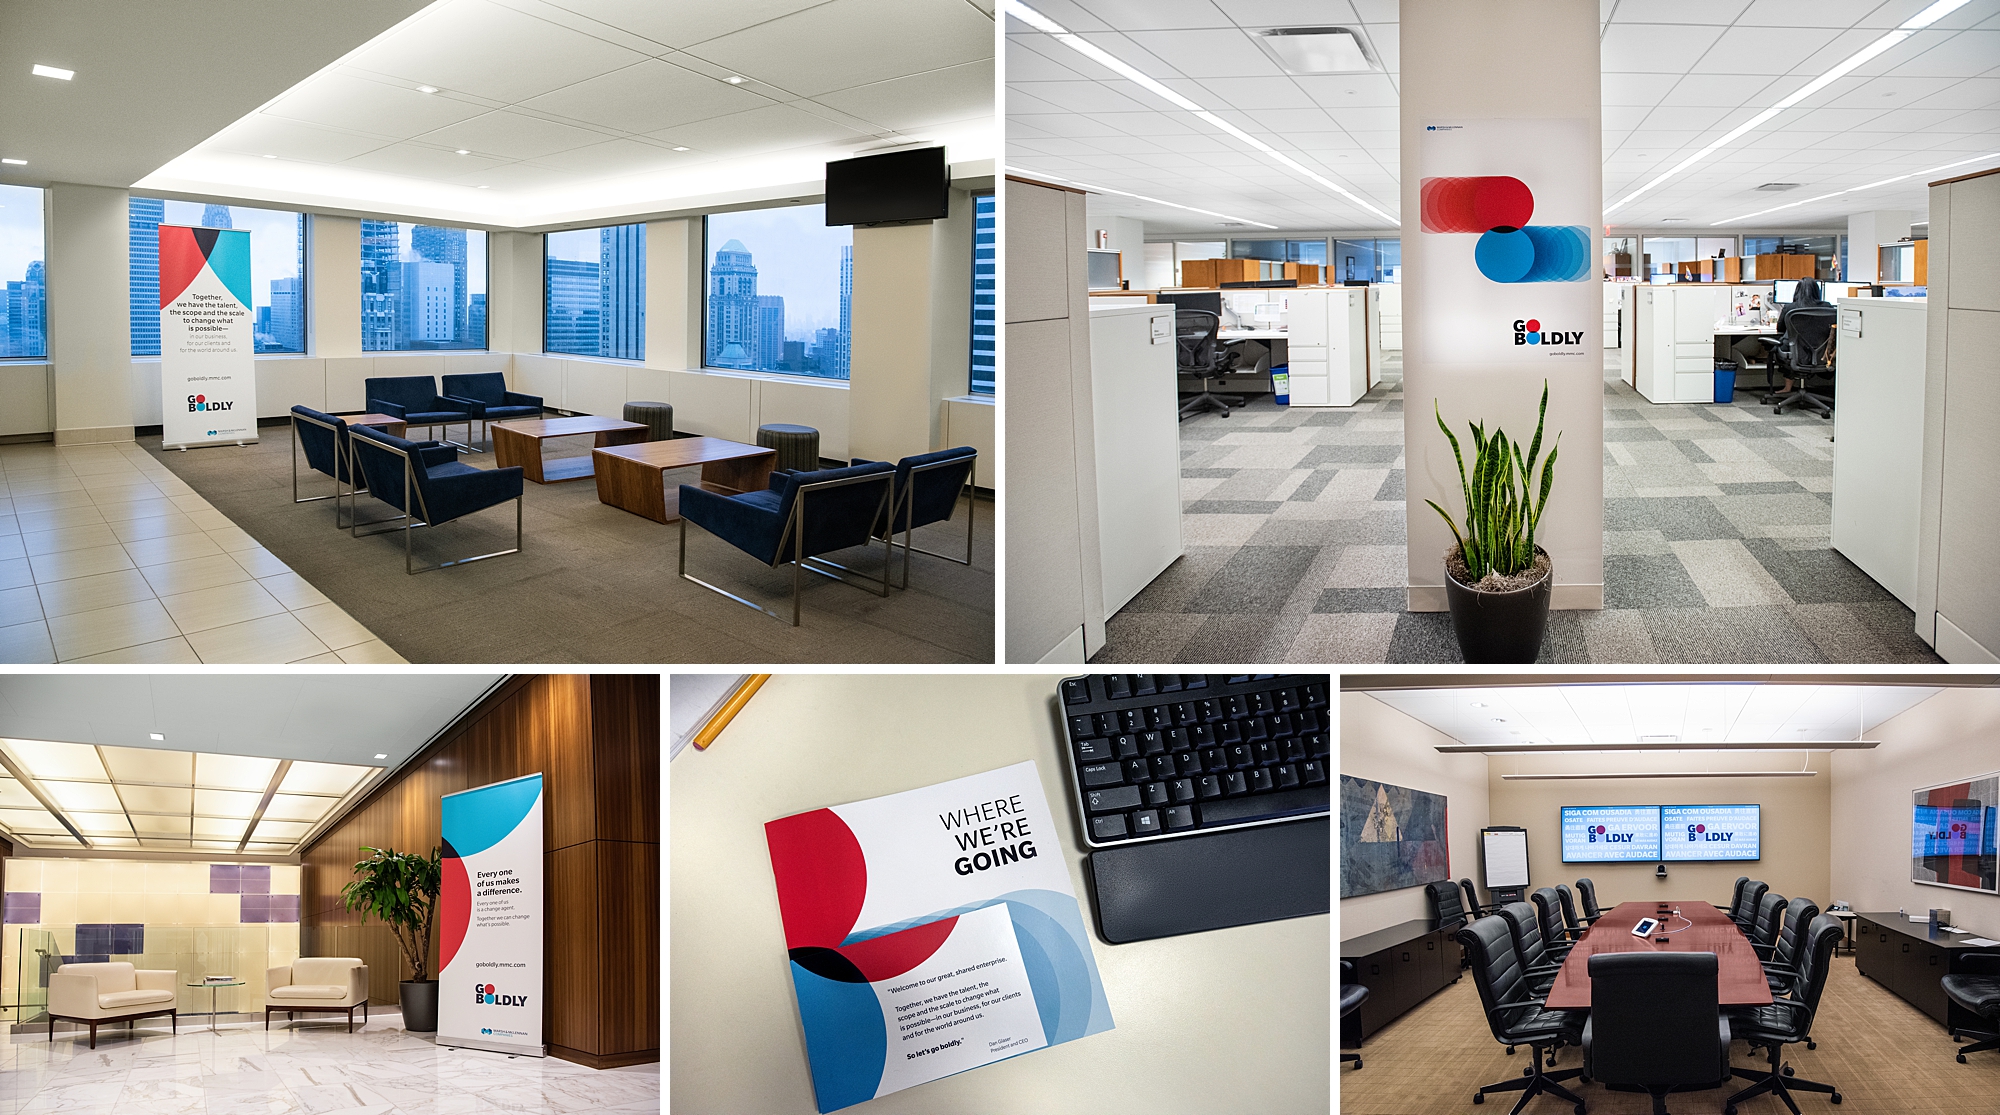 Client celebrated the integration of their company with JLT. They needed office interior photographs that illustrated specific signage and the office spaces. 